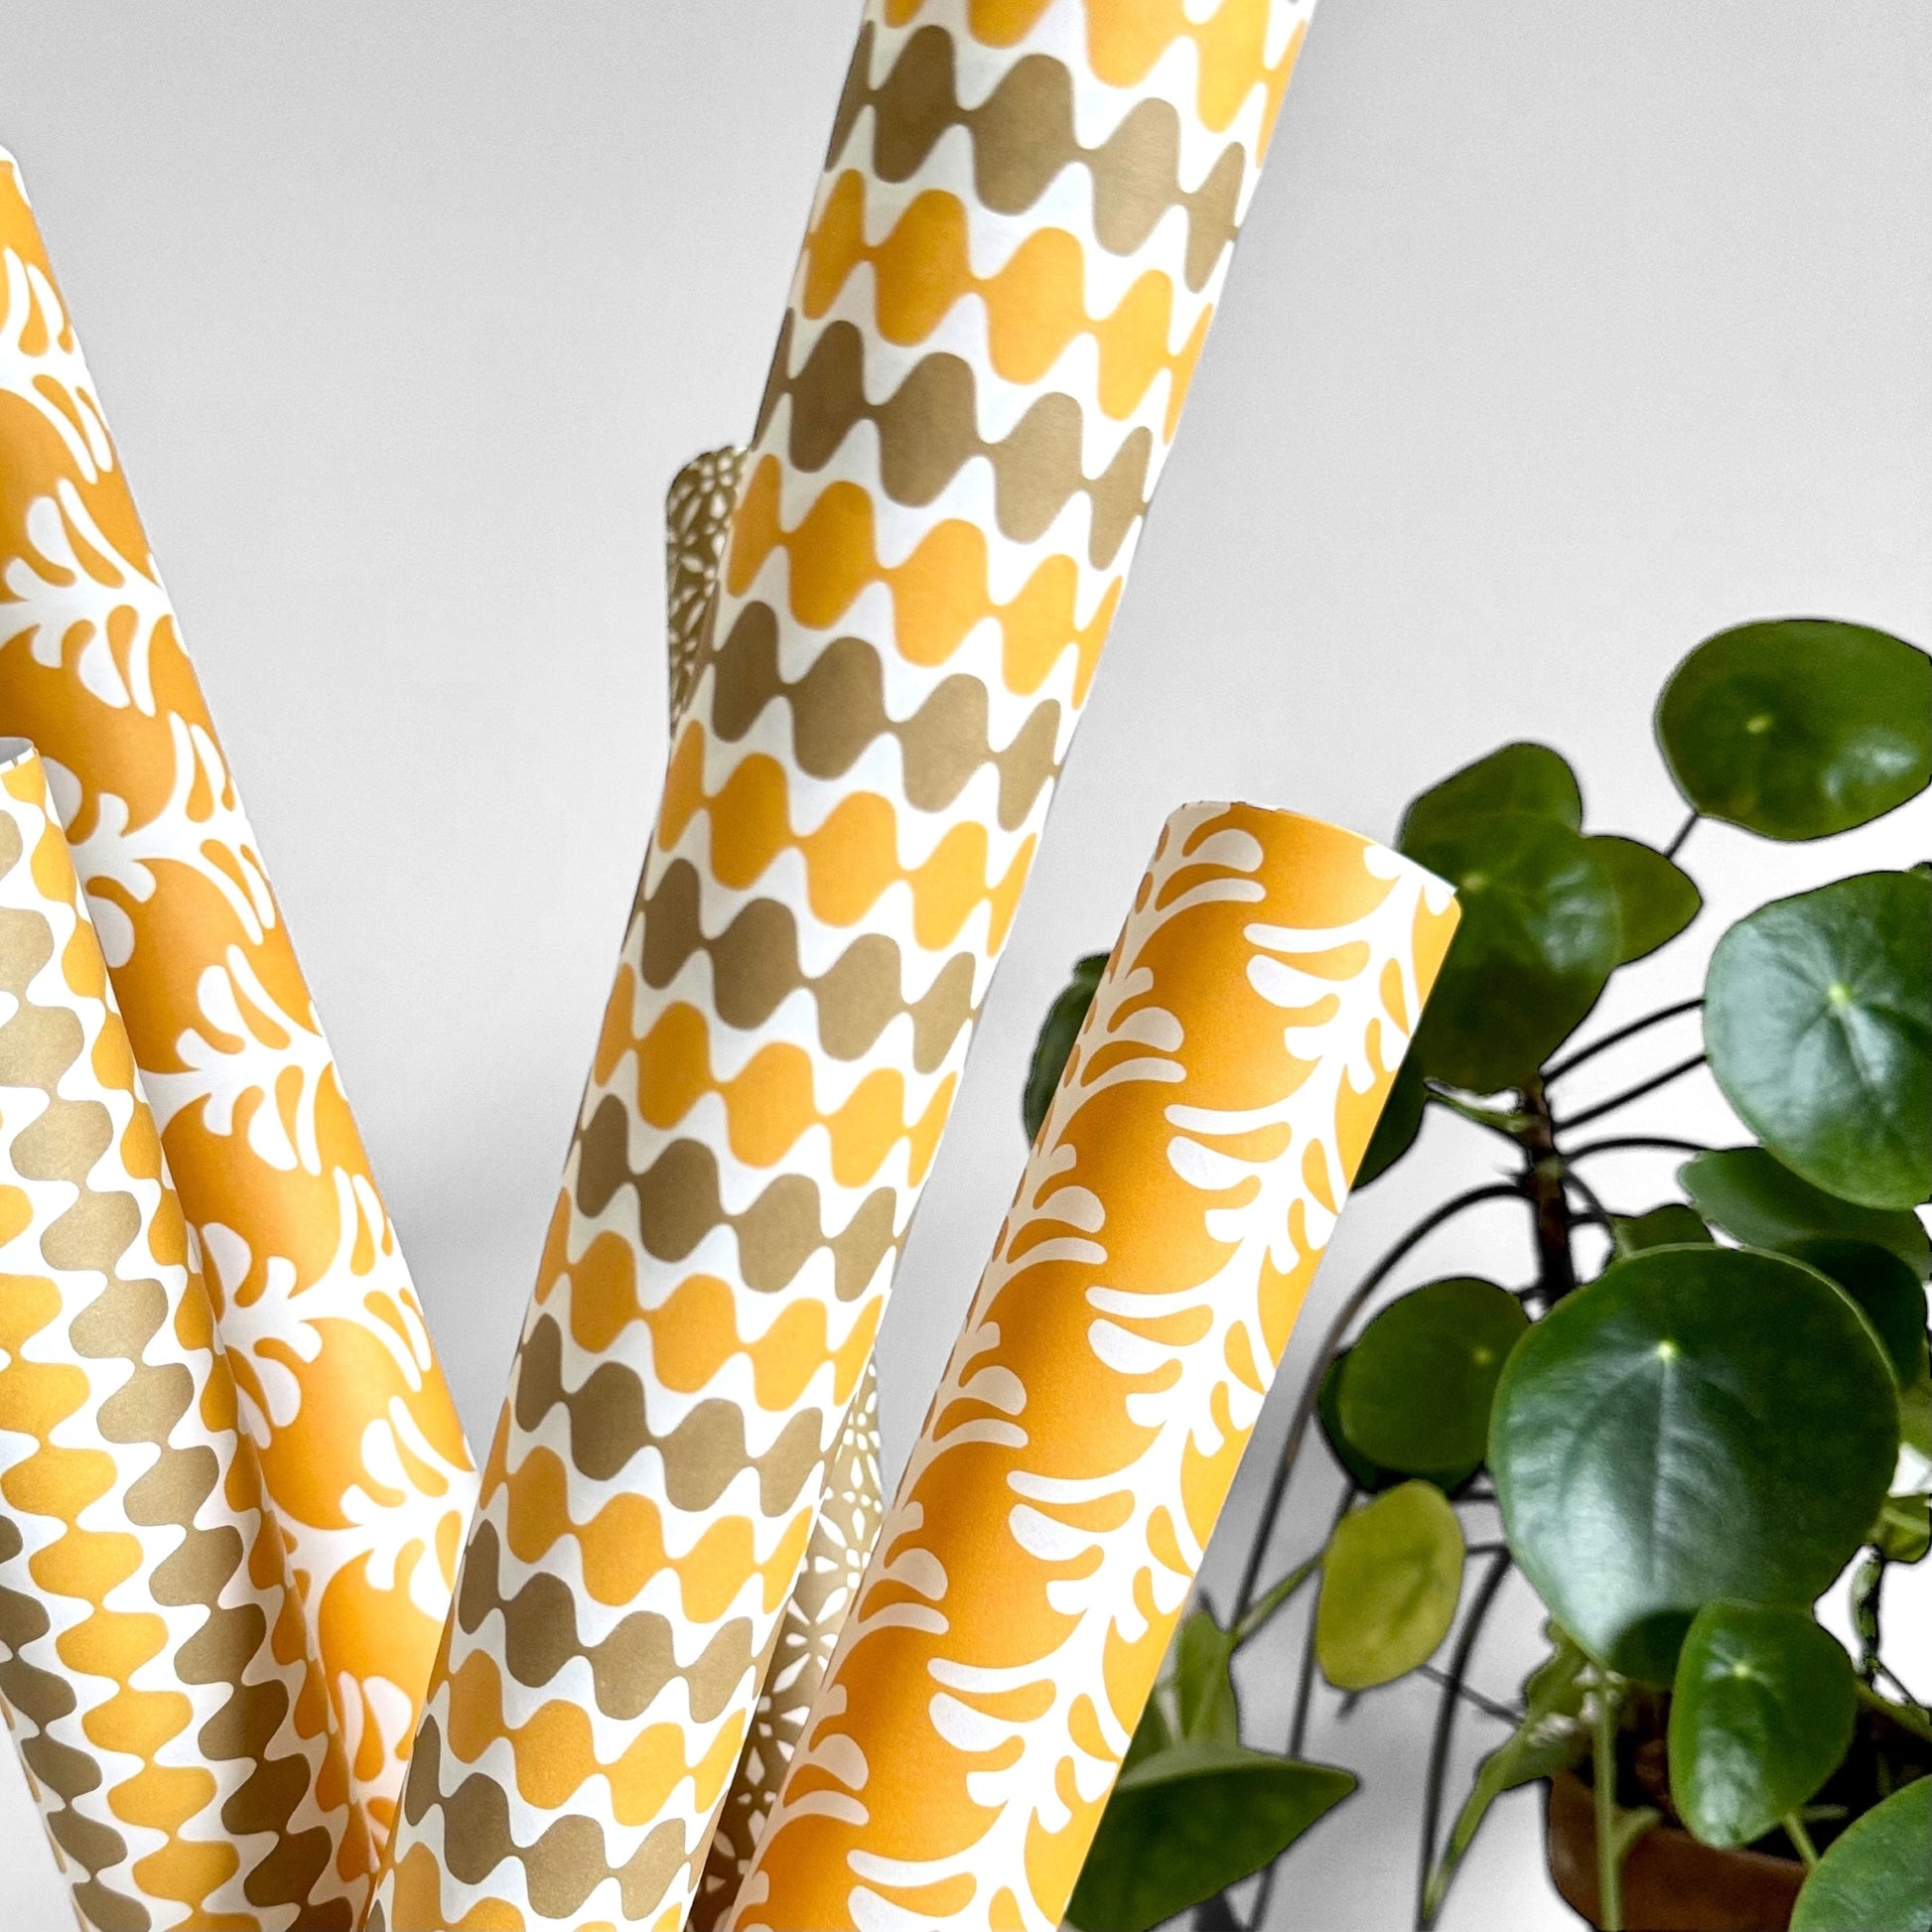 wrapping paper by Otto Editions with a cut-out wavy design in white on a yellow and gold background. Pictured rolled alongside other designs